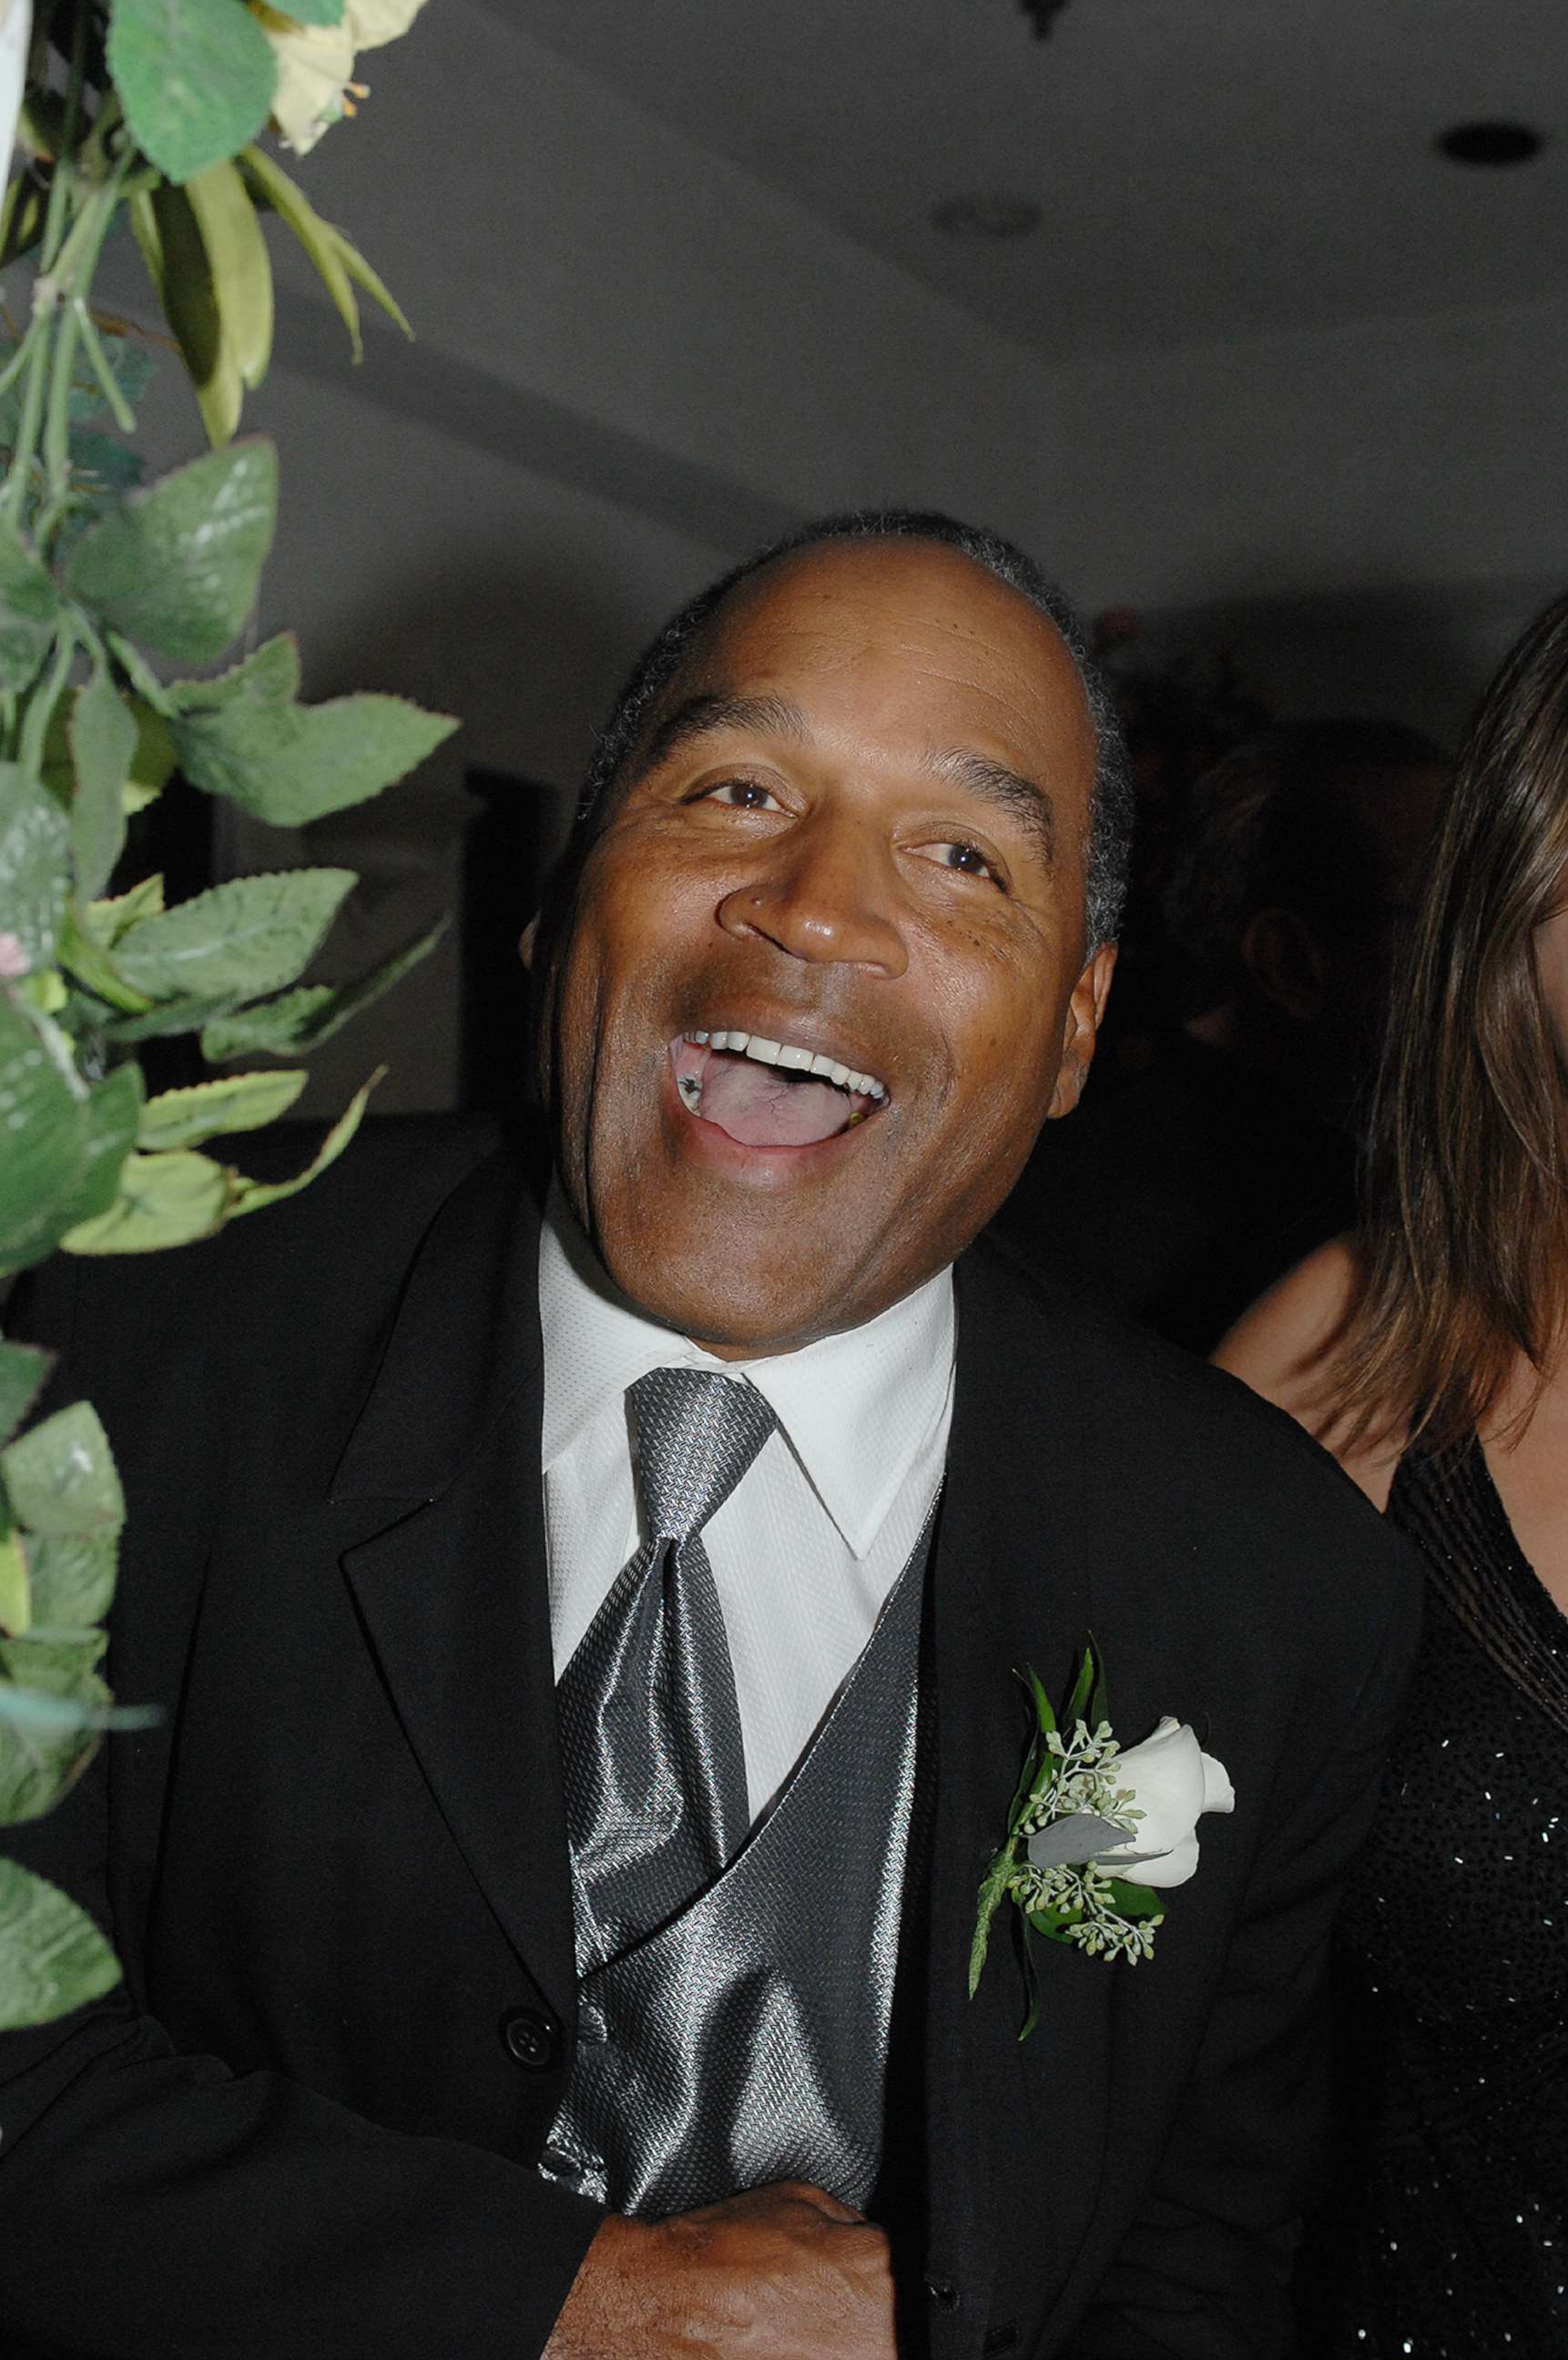 PHOTO: O.J. Simpson attended a wedding as the best man in Las Vegas, Sept. 15, 2007, just days after a sports memorabilia dealer accused Simpson of stealing memorabilia at gunpoint from his hotel suite.